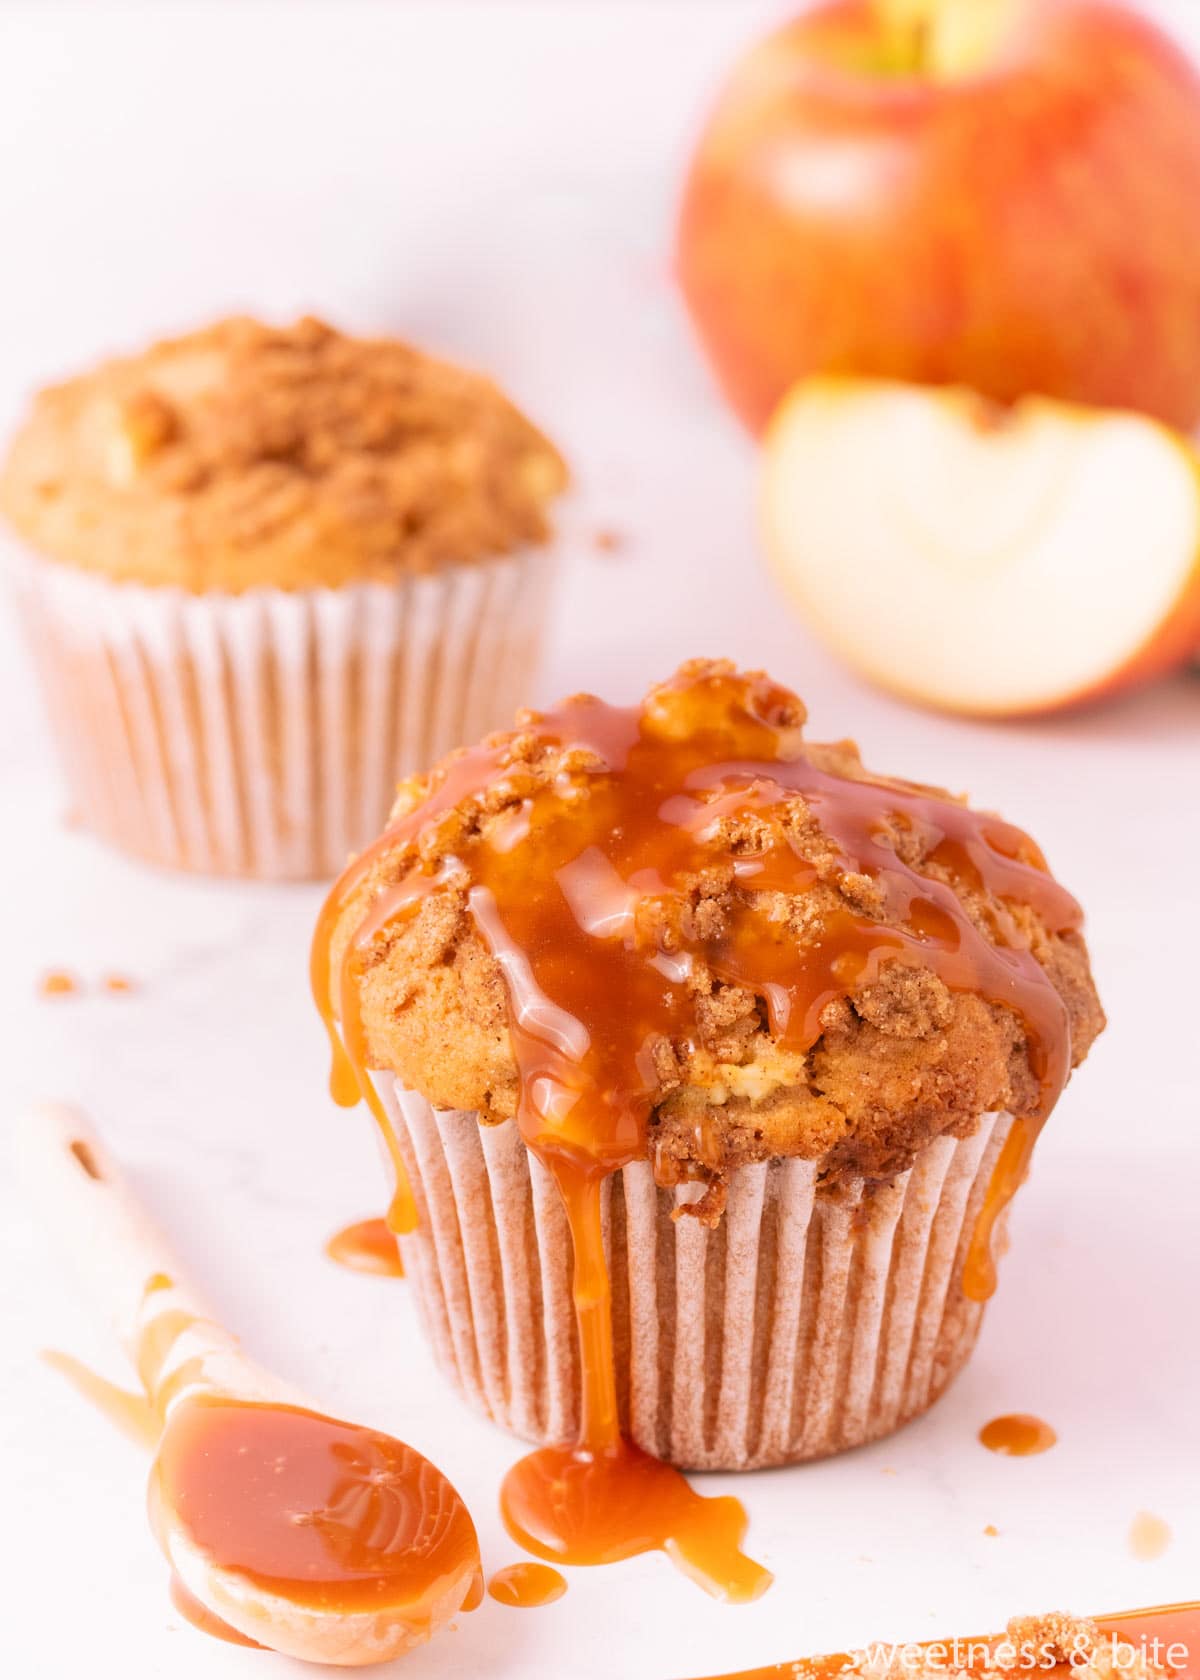 A apple muffin drizzled with rum caramel sauce.